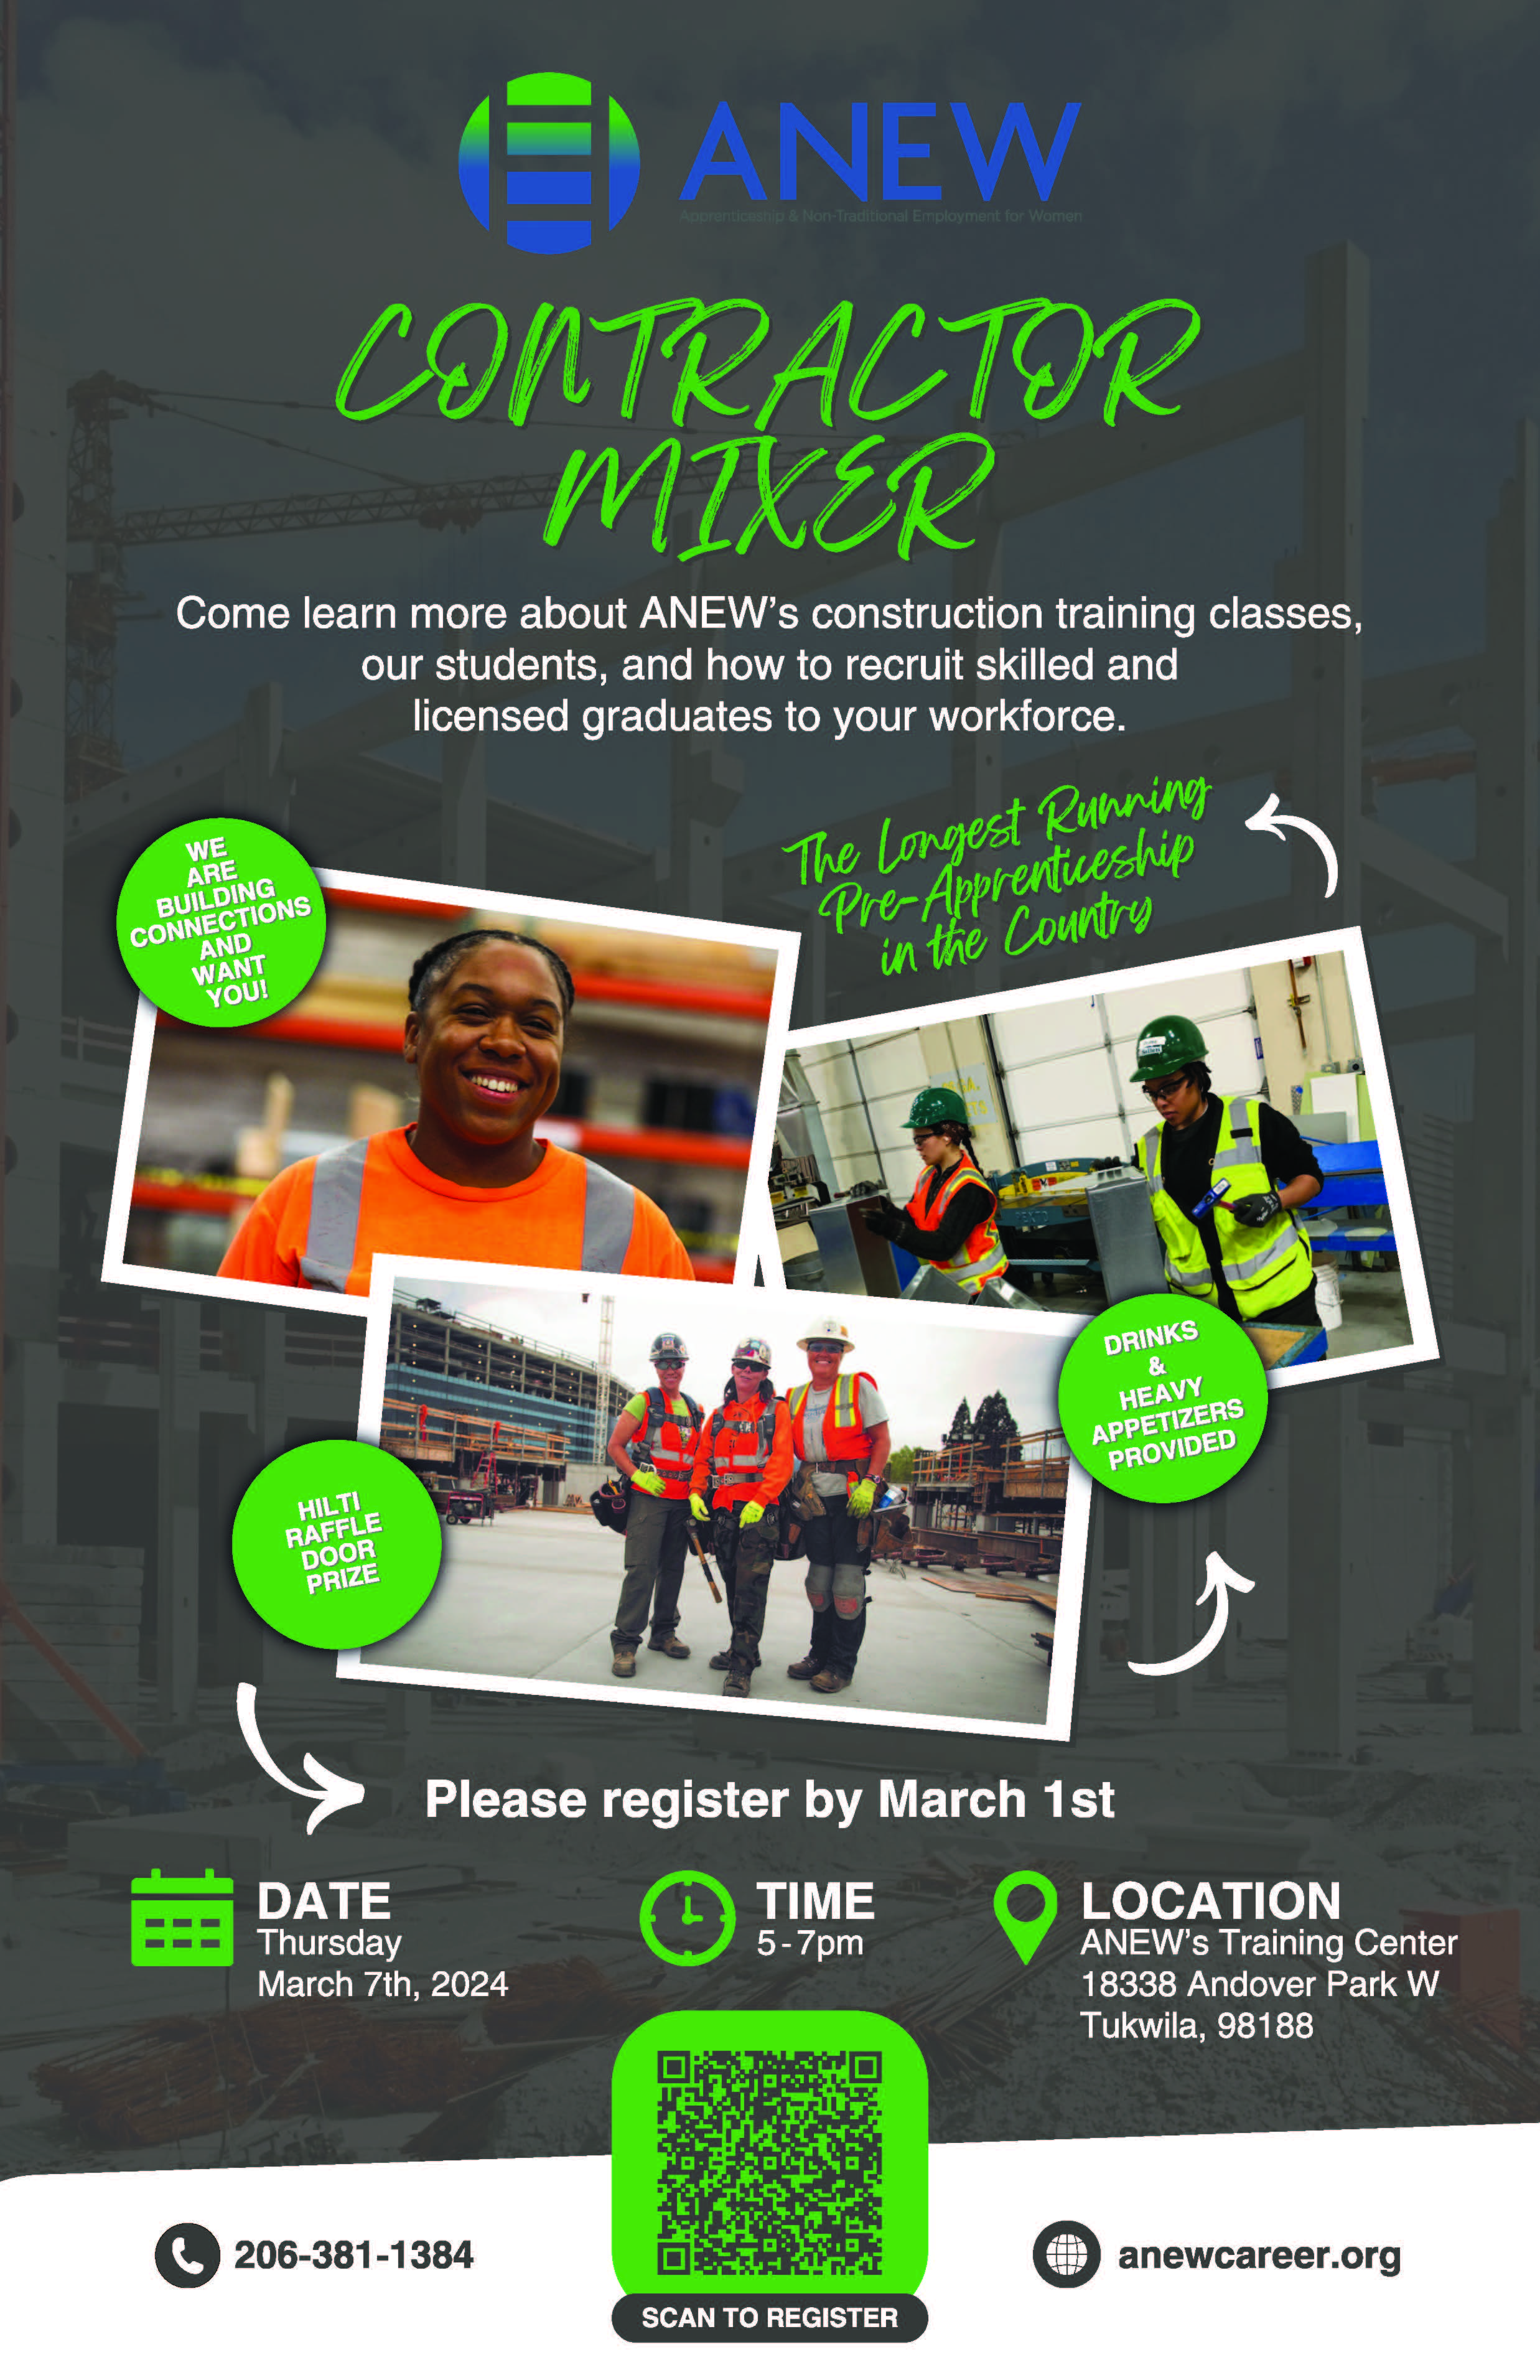 Event Promo Photo For ANEW's Contractor Mixer Event